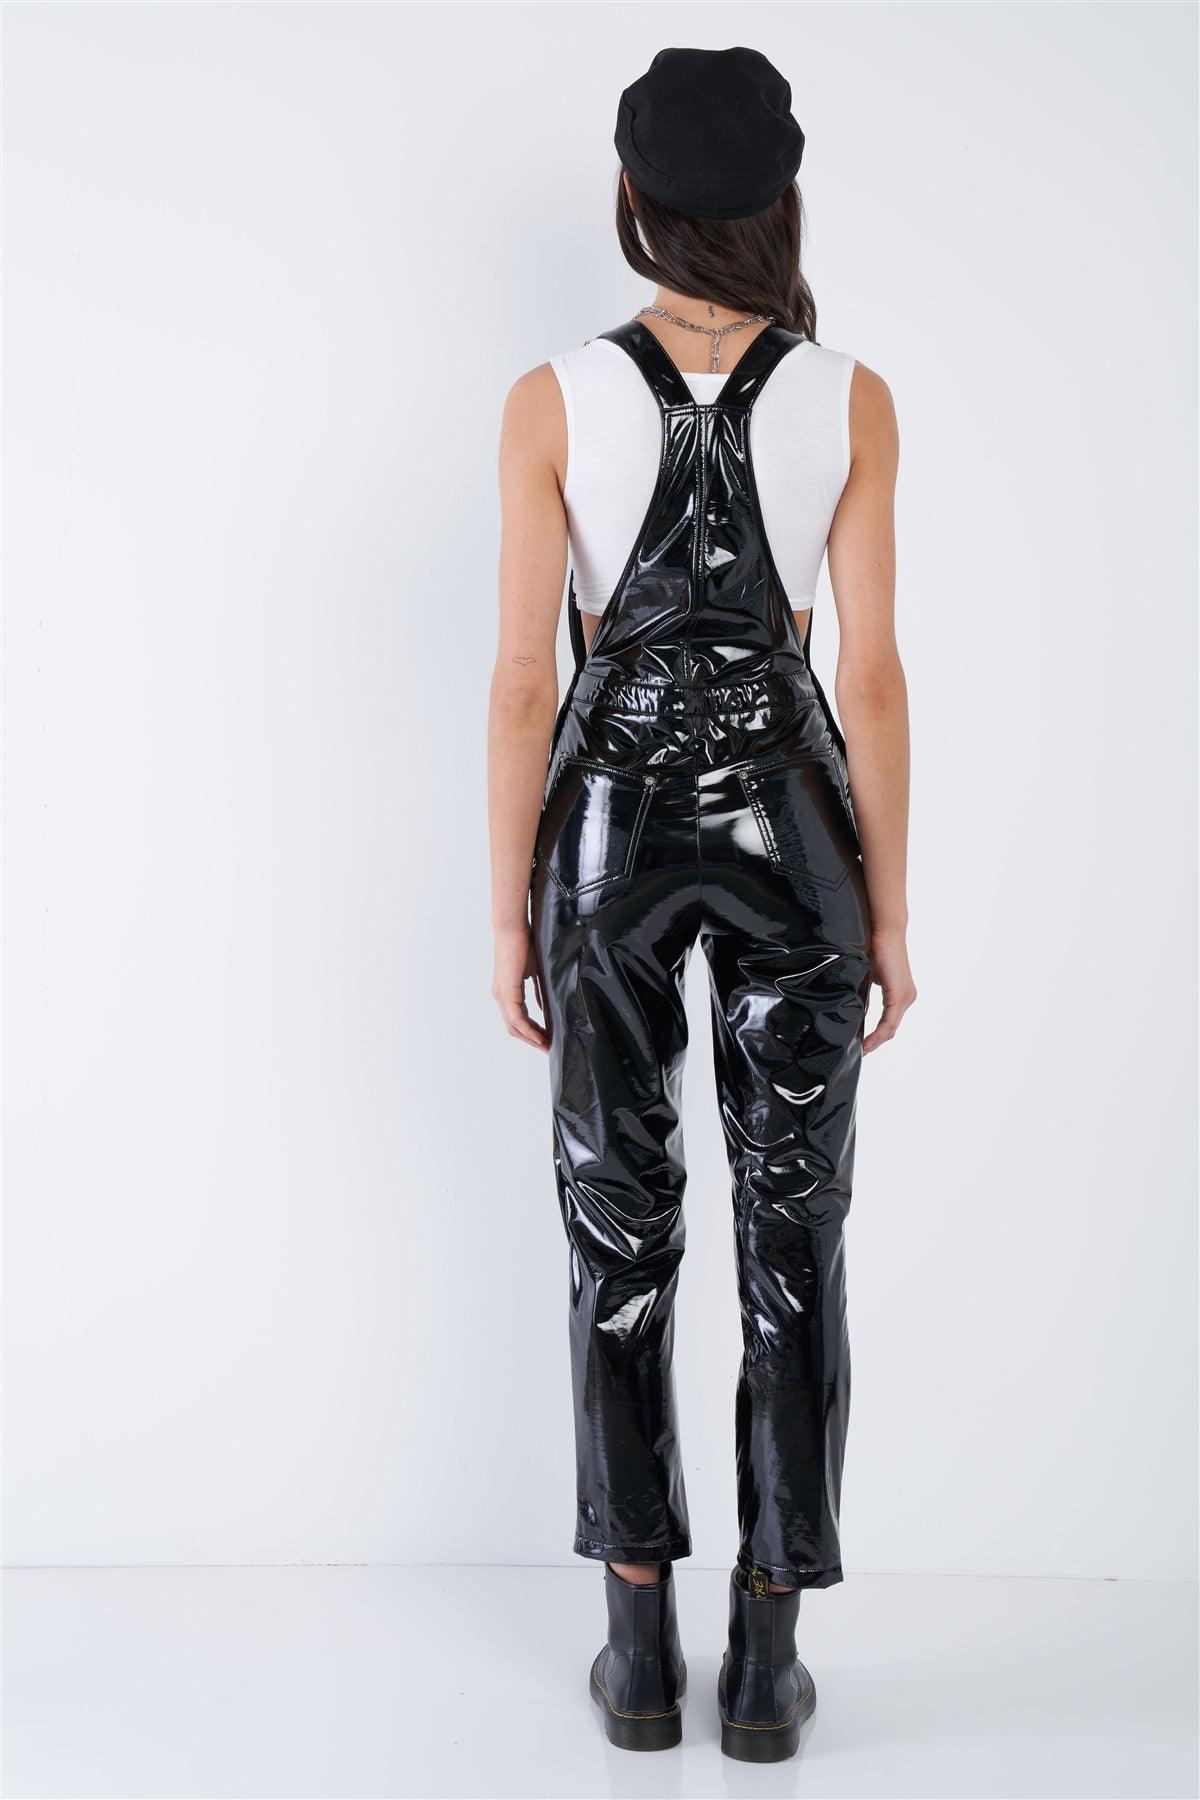 Black Faux Leather Skinny Leg Overall Jumpsuit  /3-2-1